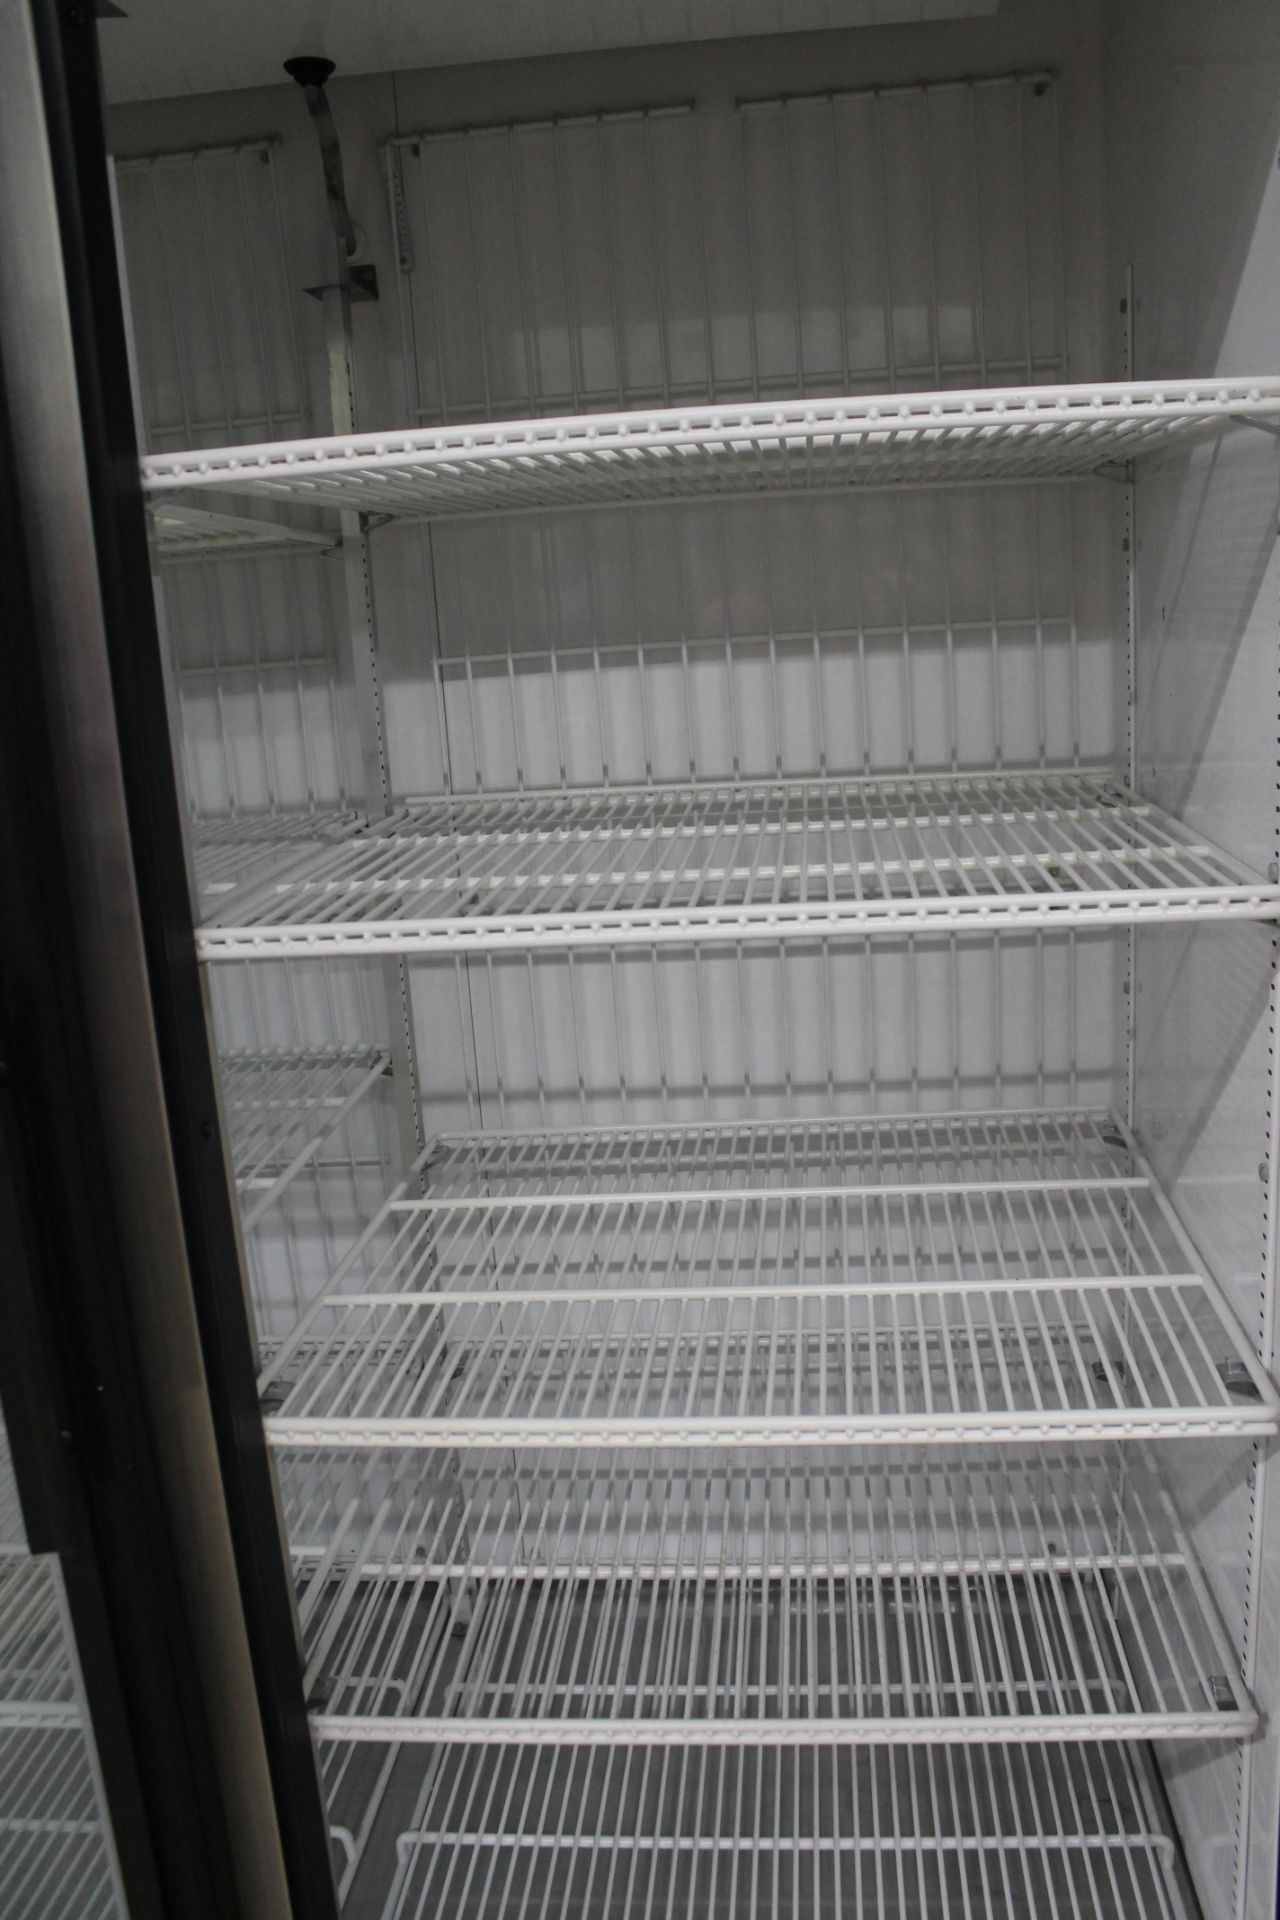 USED SWING DOOR REFRIGERATOR WITH HYDROCARBON REFRIGERANT - Image 4 of 5